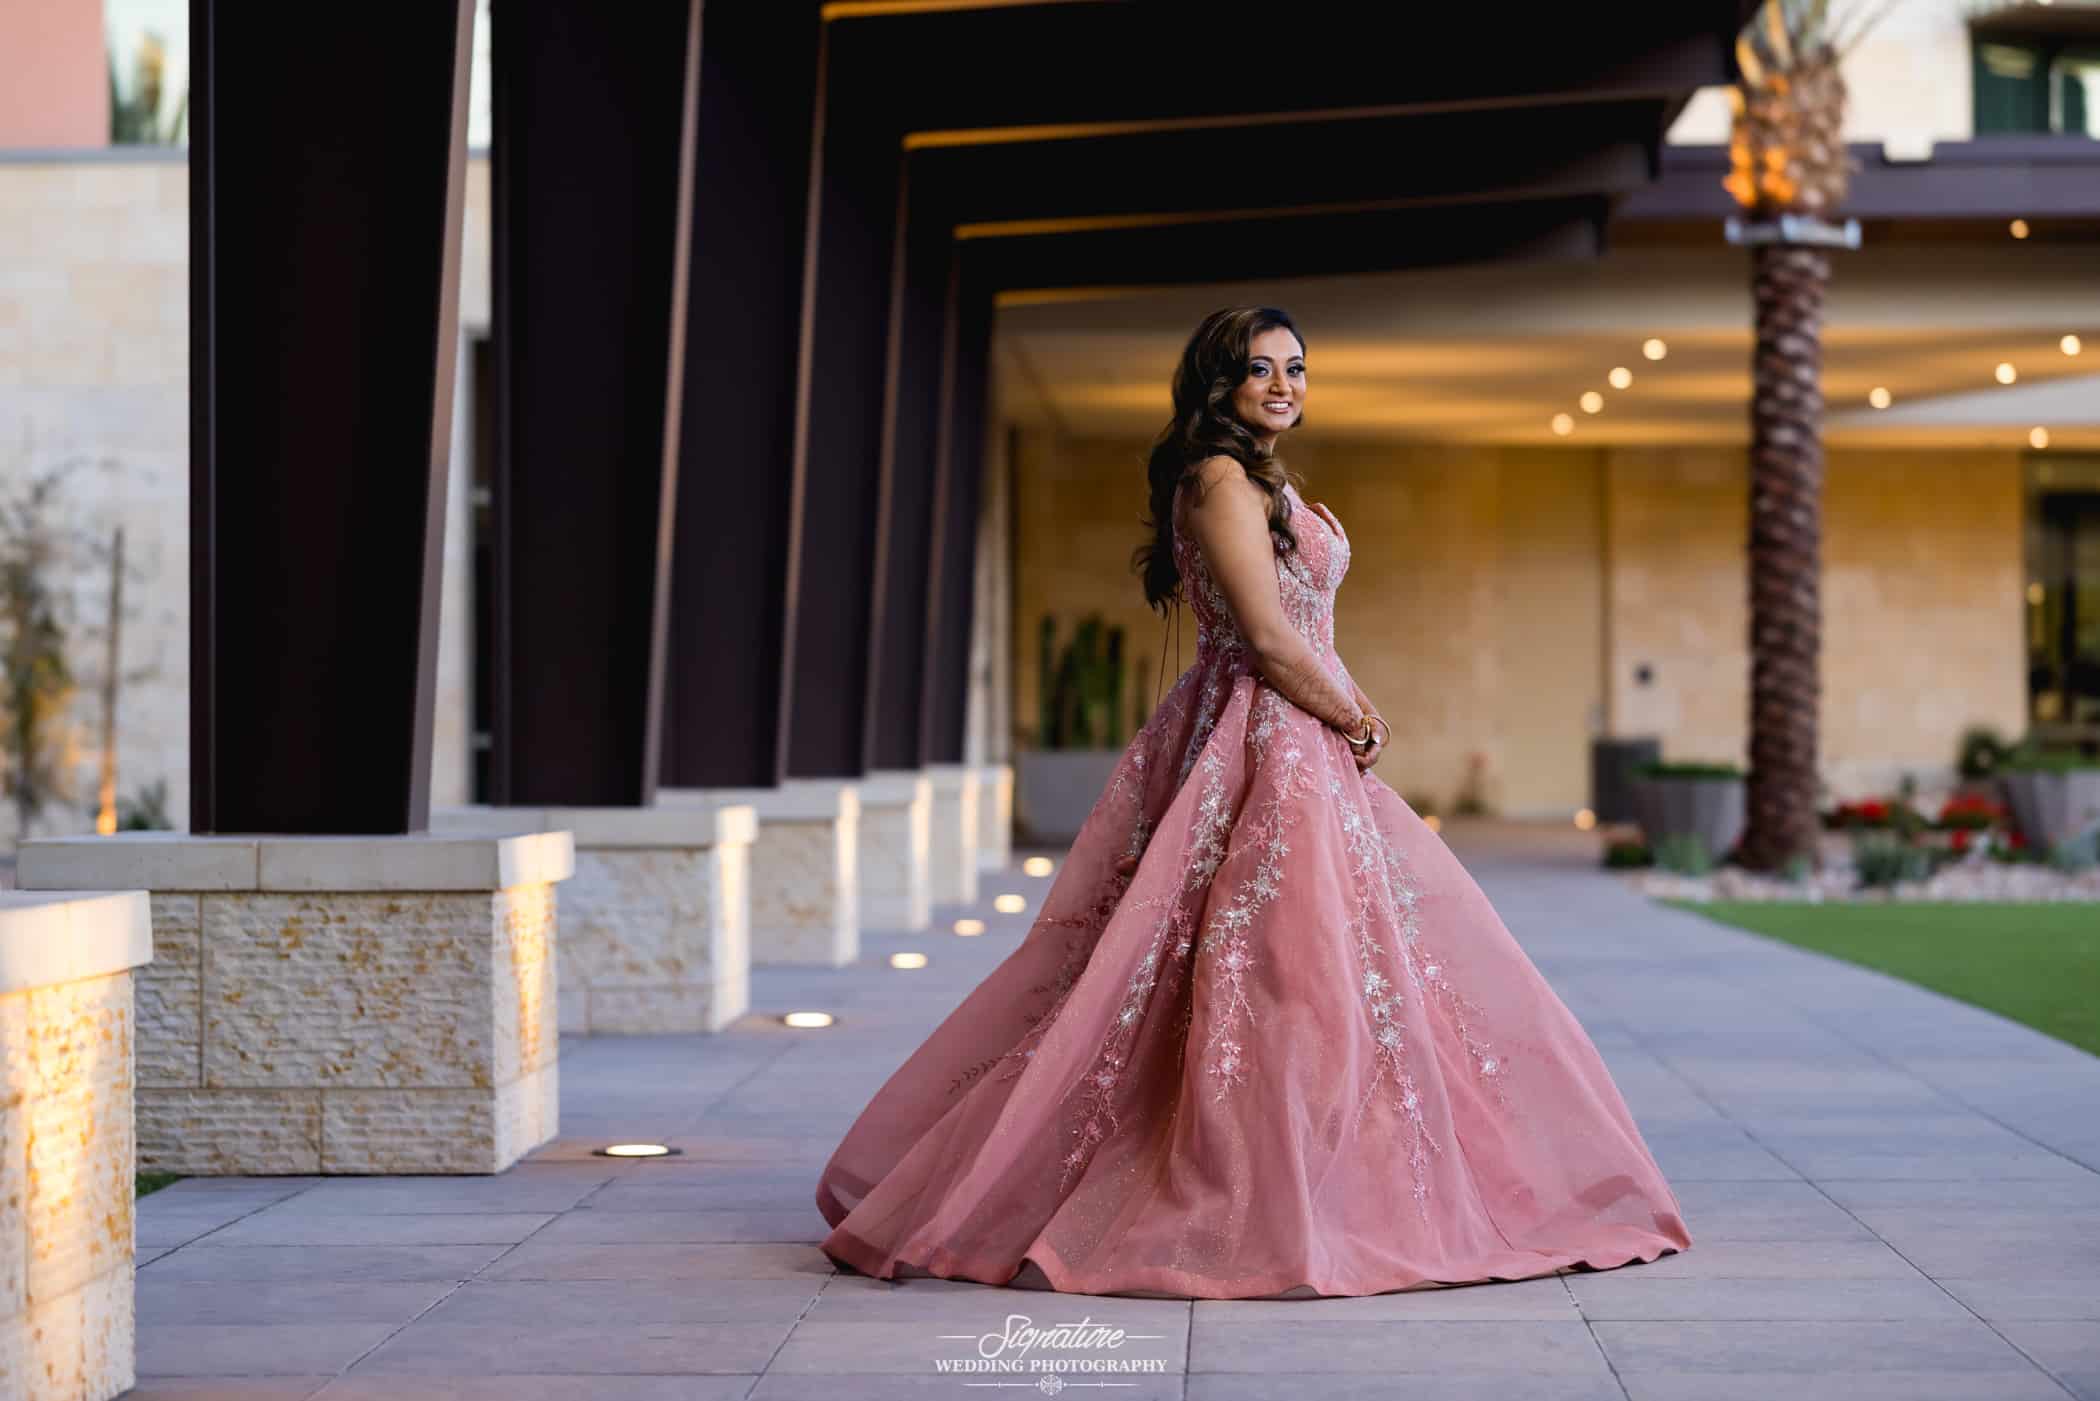 Bride with her full pink dress